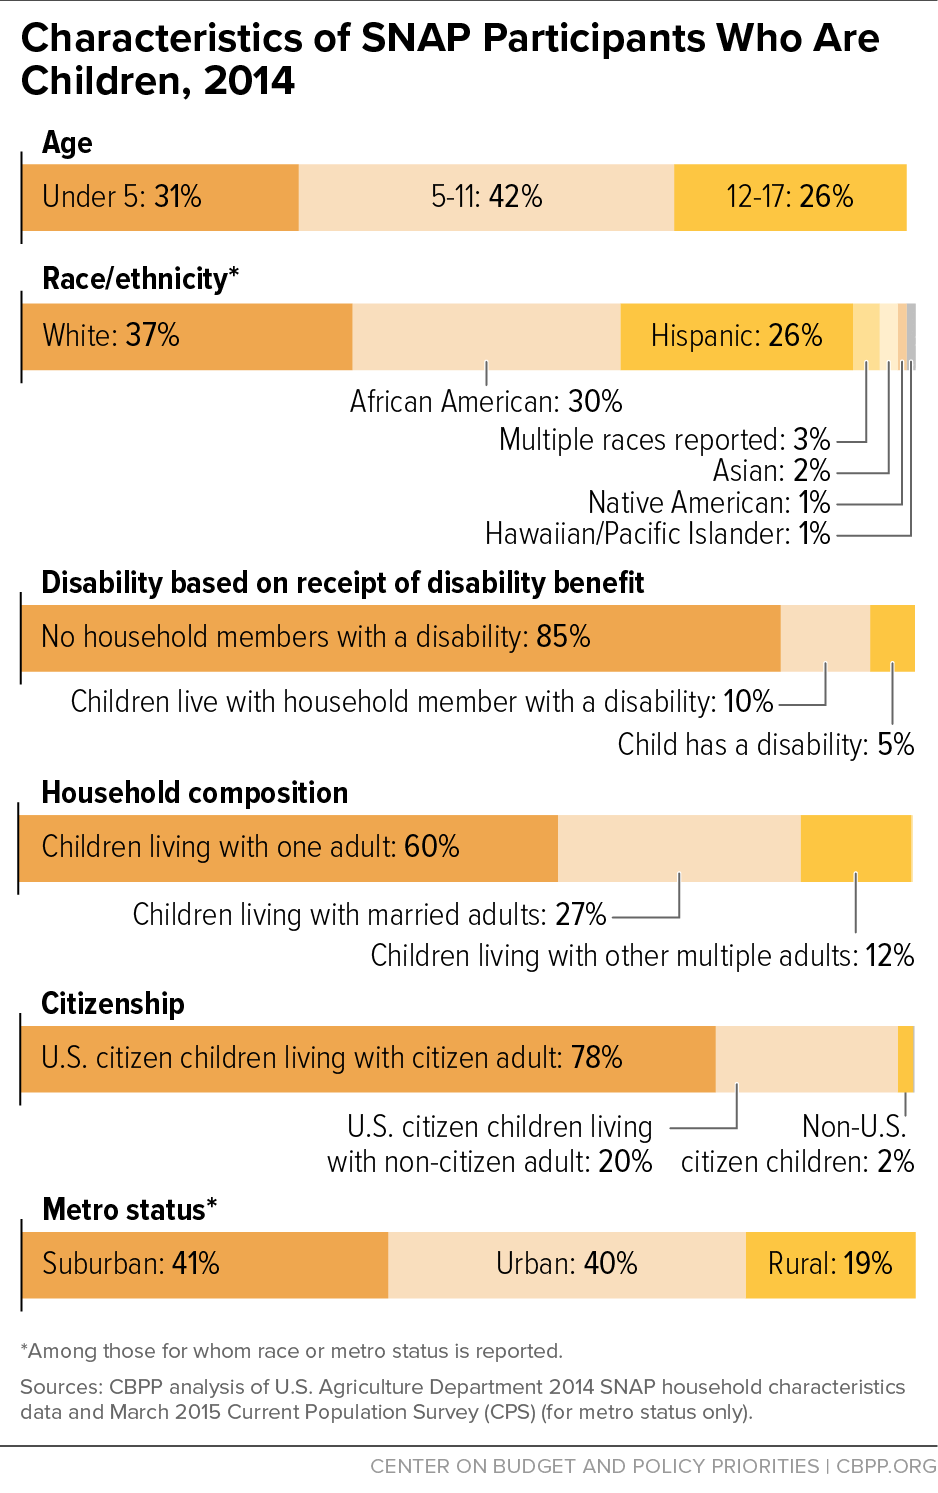 Characteristics of SNAP Participants Who Are Children, 2014